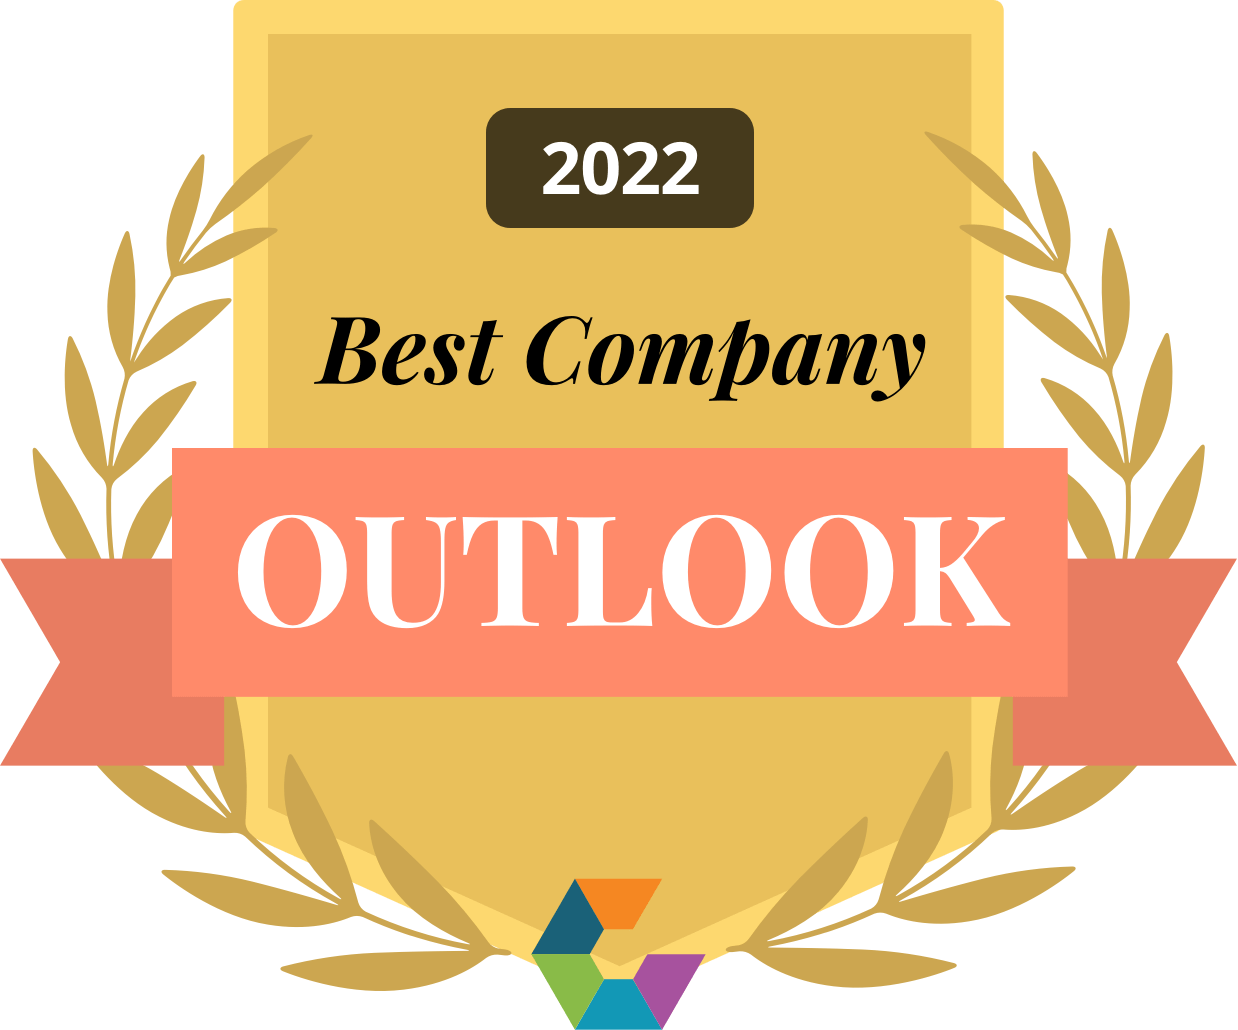 2022 Best Company Outlook badge